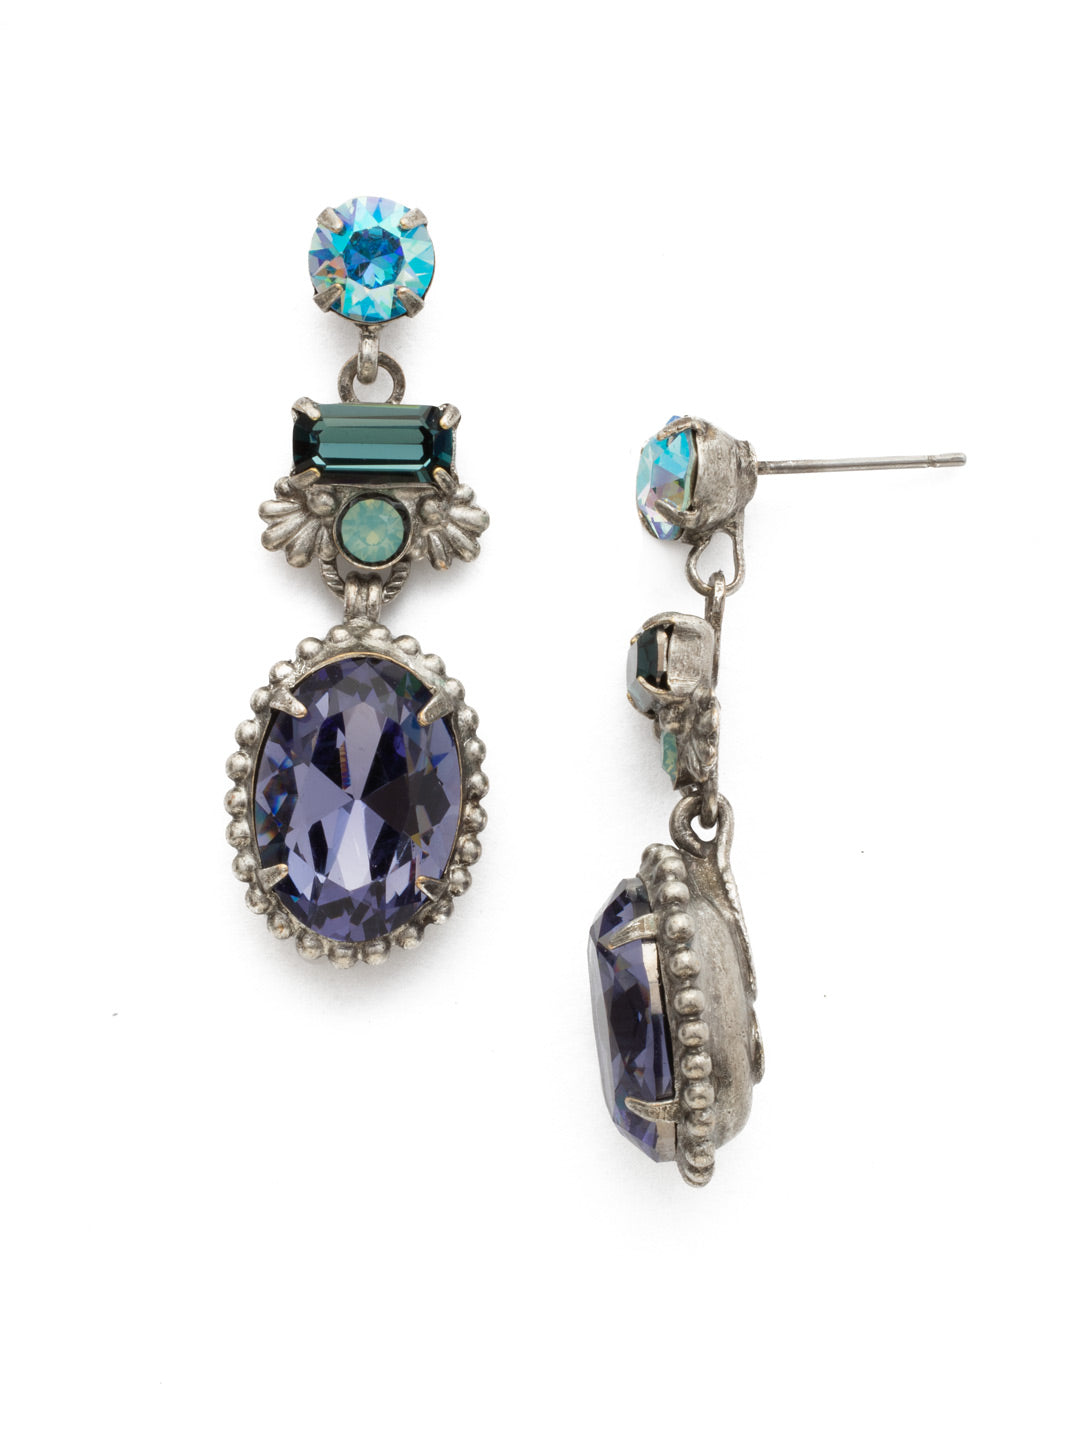 Bergenia Earring - EDS40ASMLS - Round, baguette and oval cut crystals stack up to provide classic style that's accented with vintage metal details.